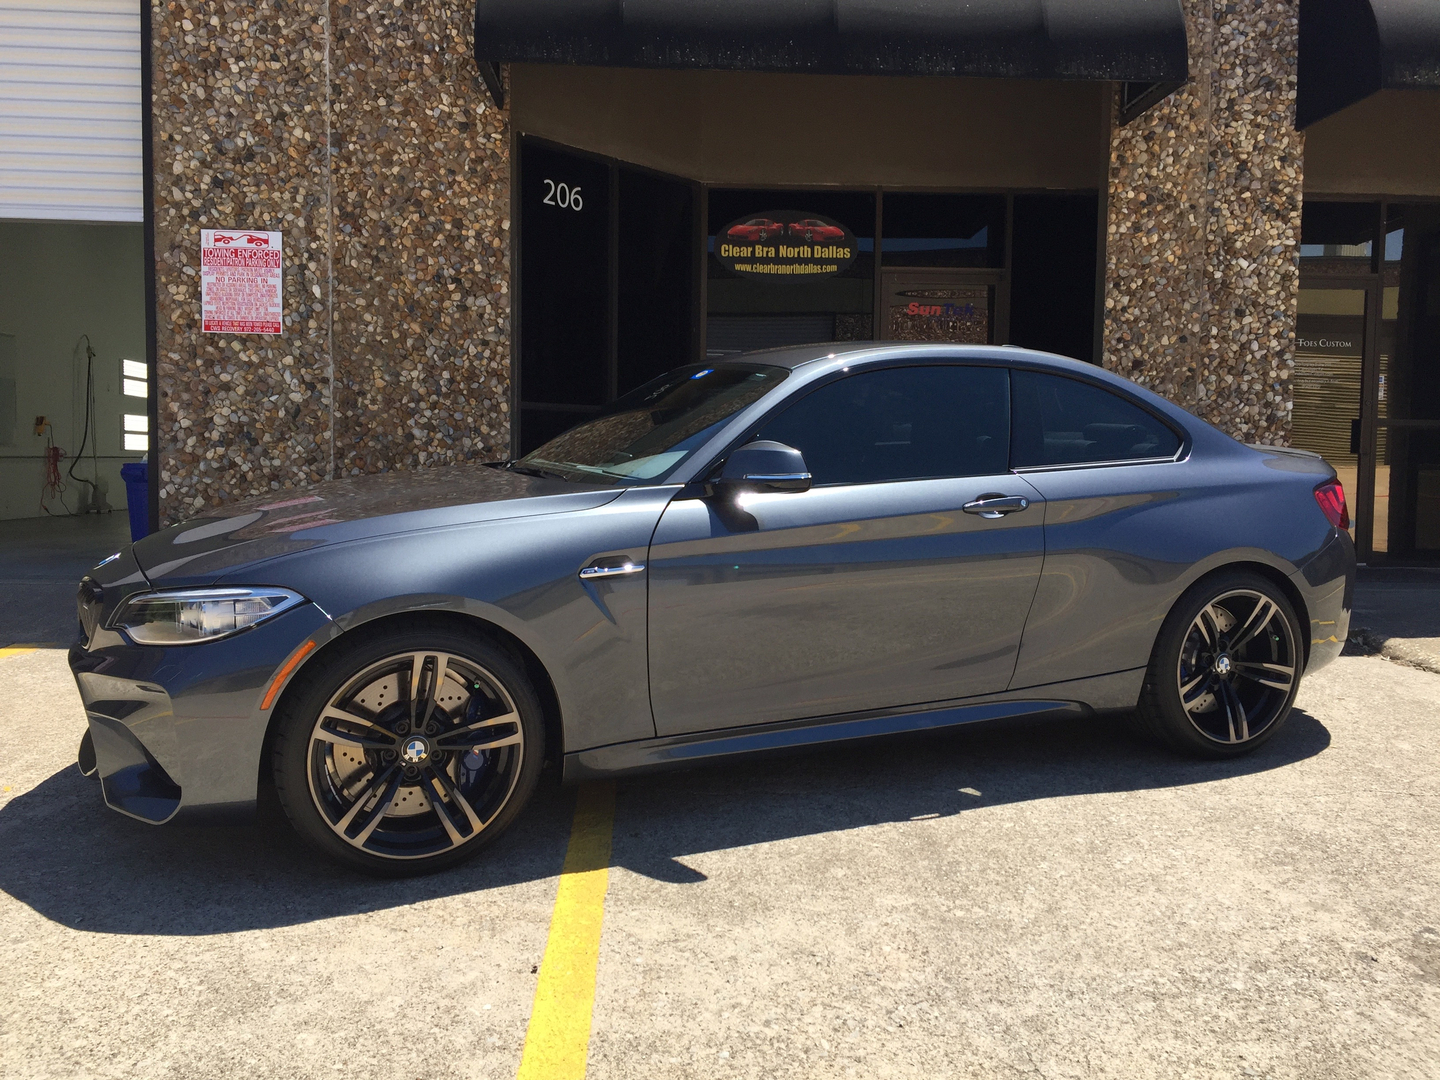 XPEL Clear Bra, Raleigh, NC  Osiris Paint Protection & Window Films